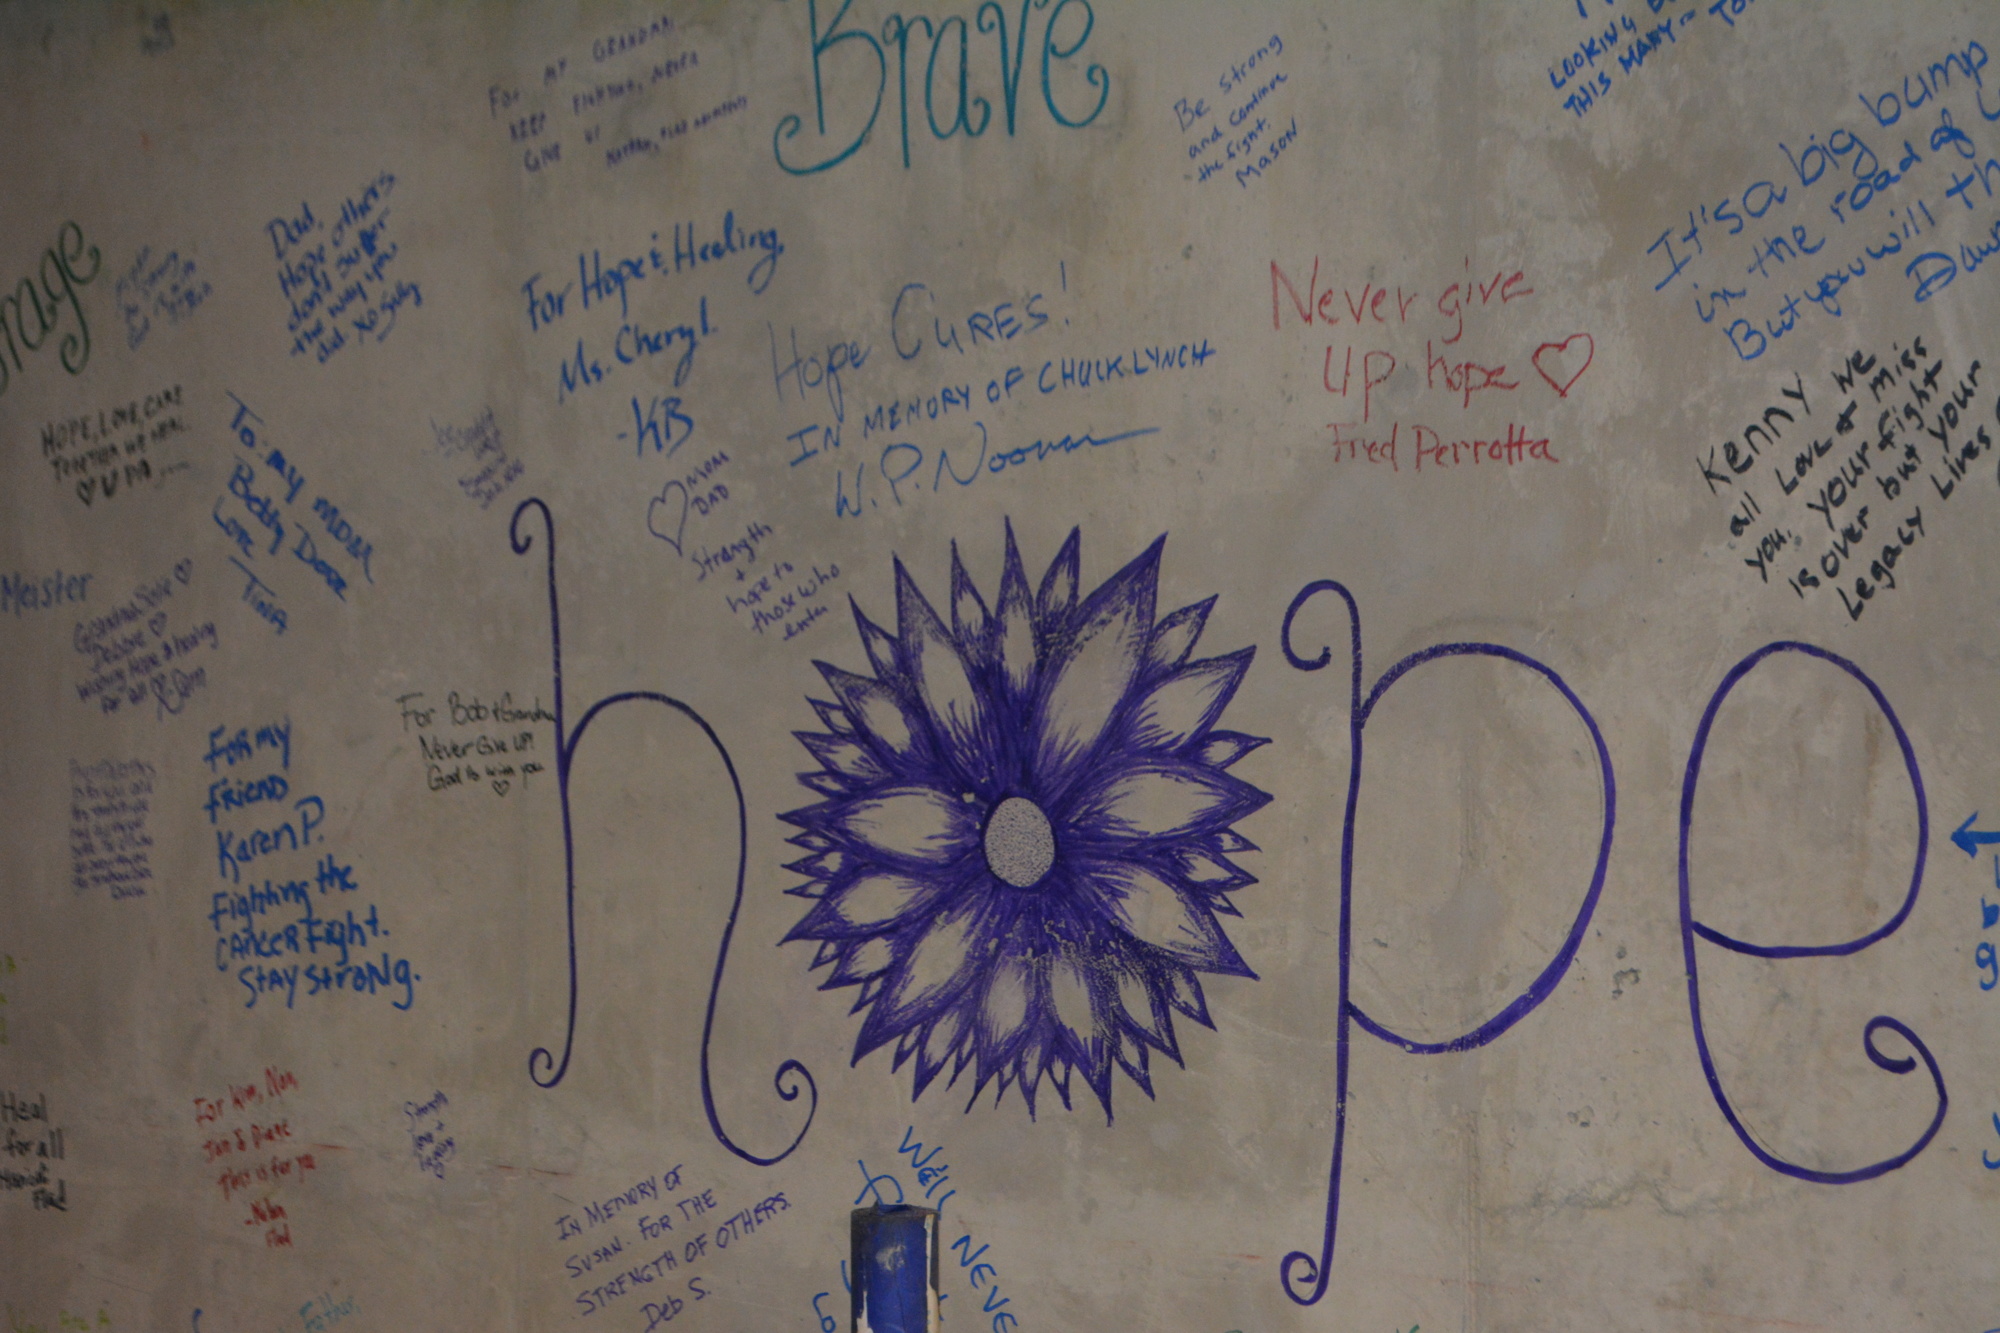 Heartfelt messages from staff and patients spread across the wall of one of two linear accelerator vaults of the almost-completed Radiation Oncology Center. The facility is scheduled to be treating patients by August 2020.